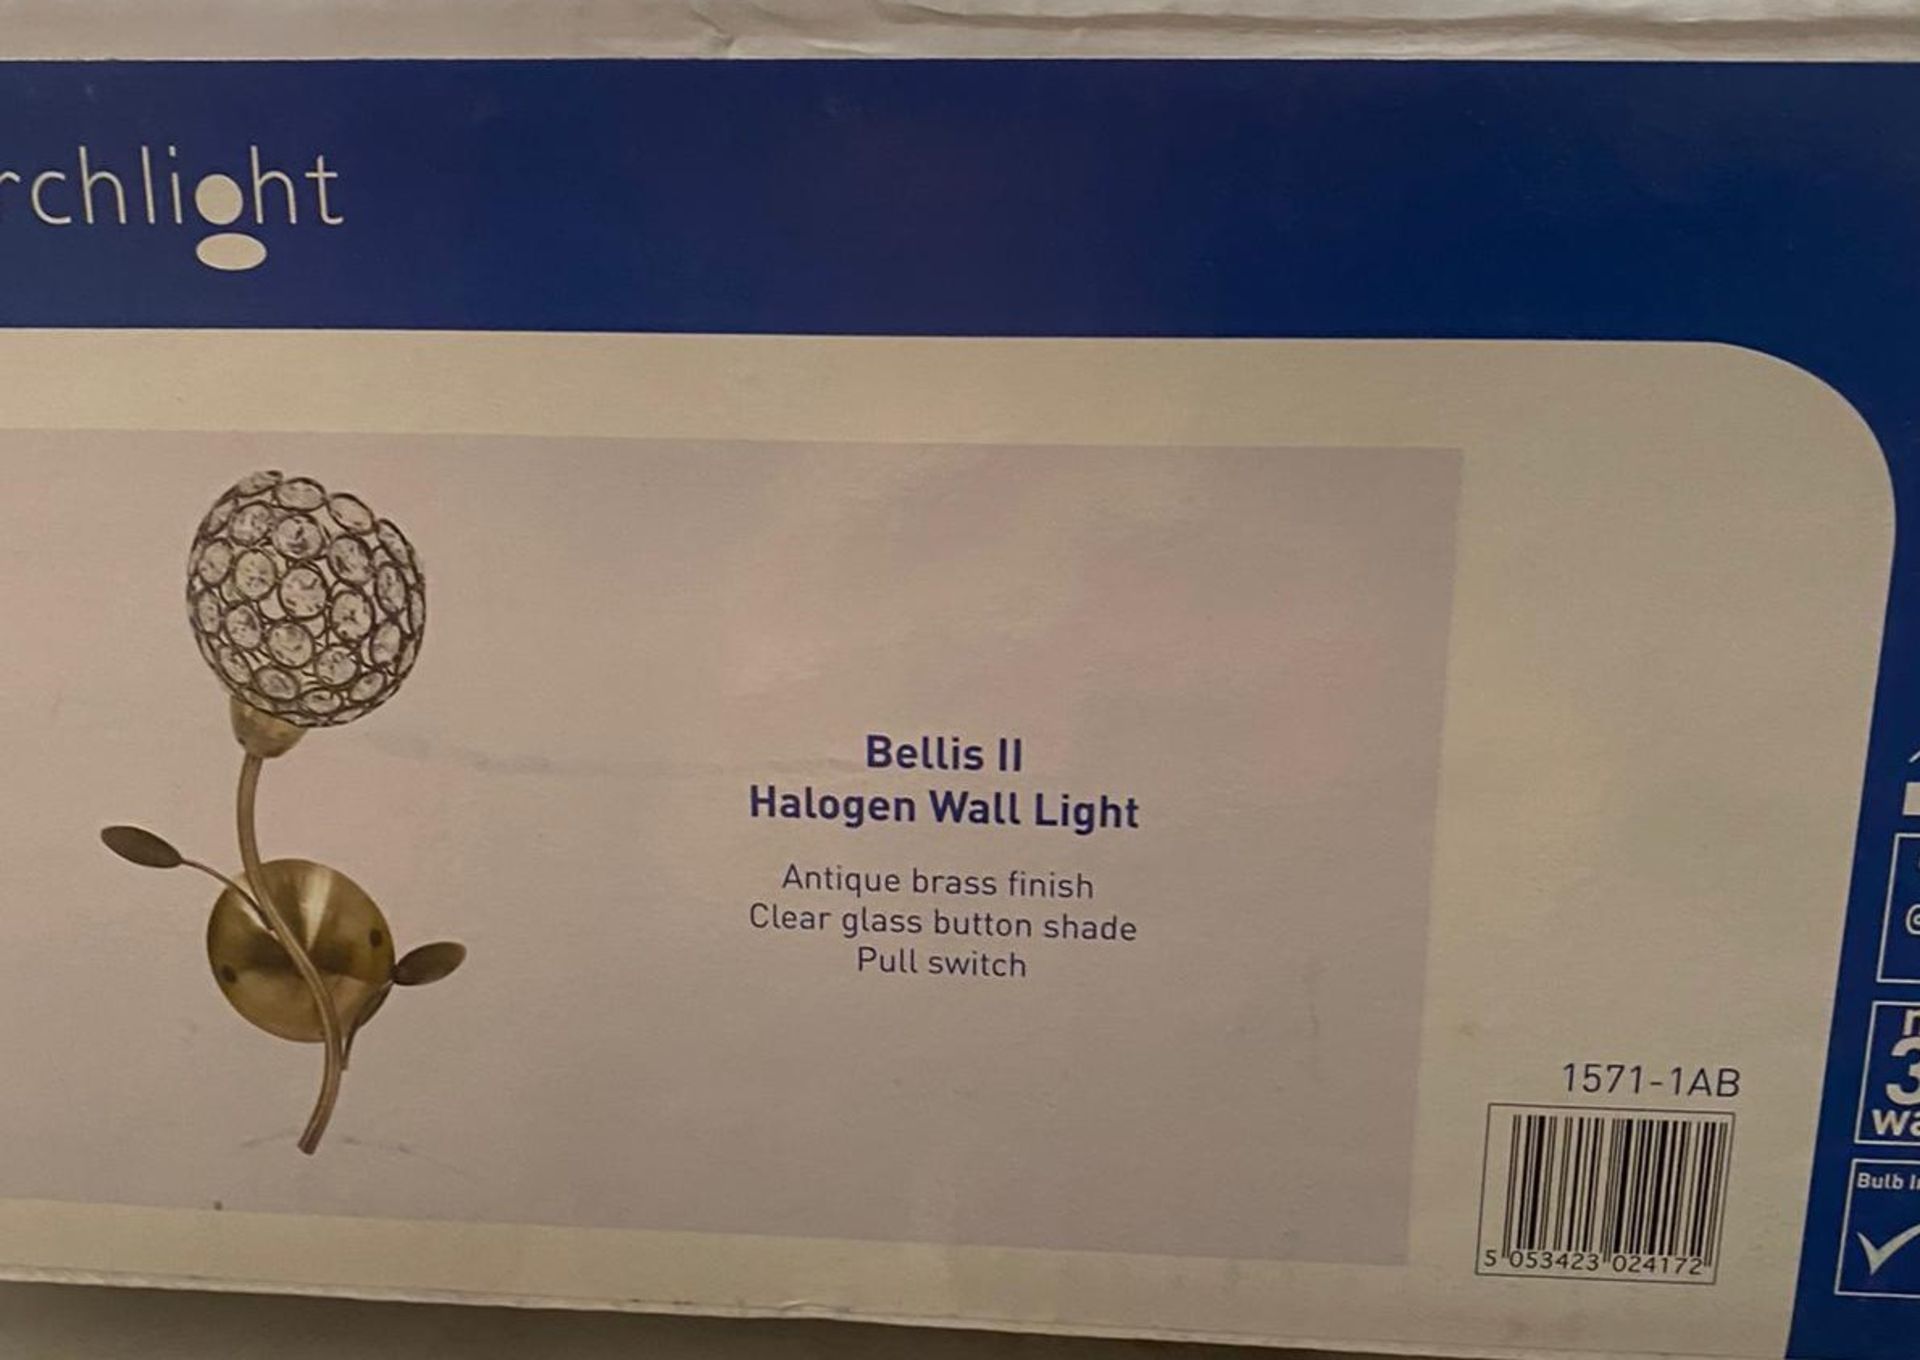 2 x Searchlight Bellis II Halogen in Antique Brass- Ref: 1571-1AB - New And Boxed Stock - RRP: £60